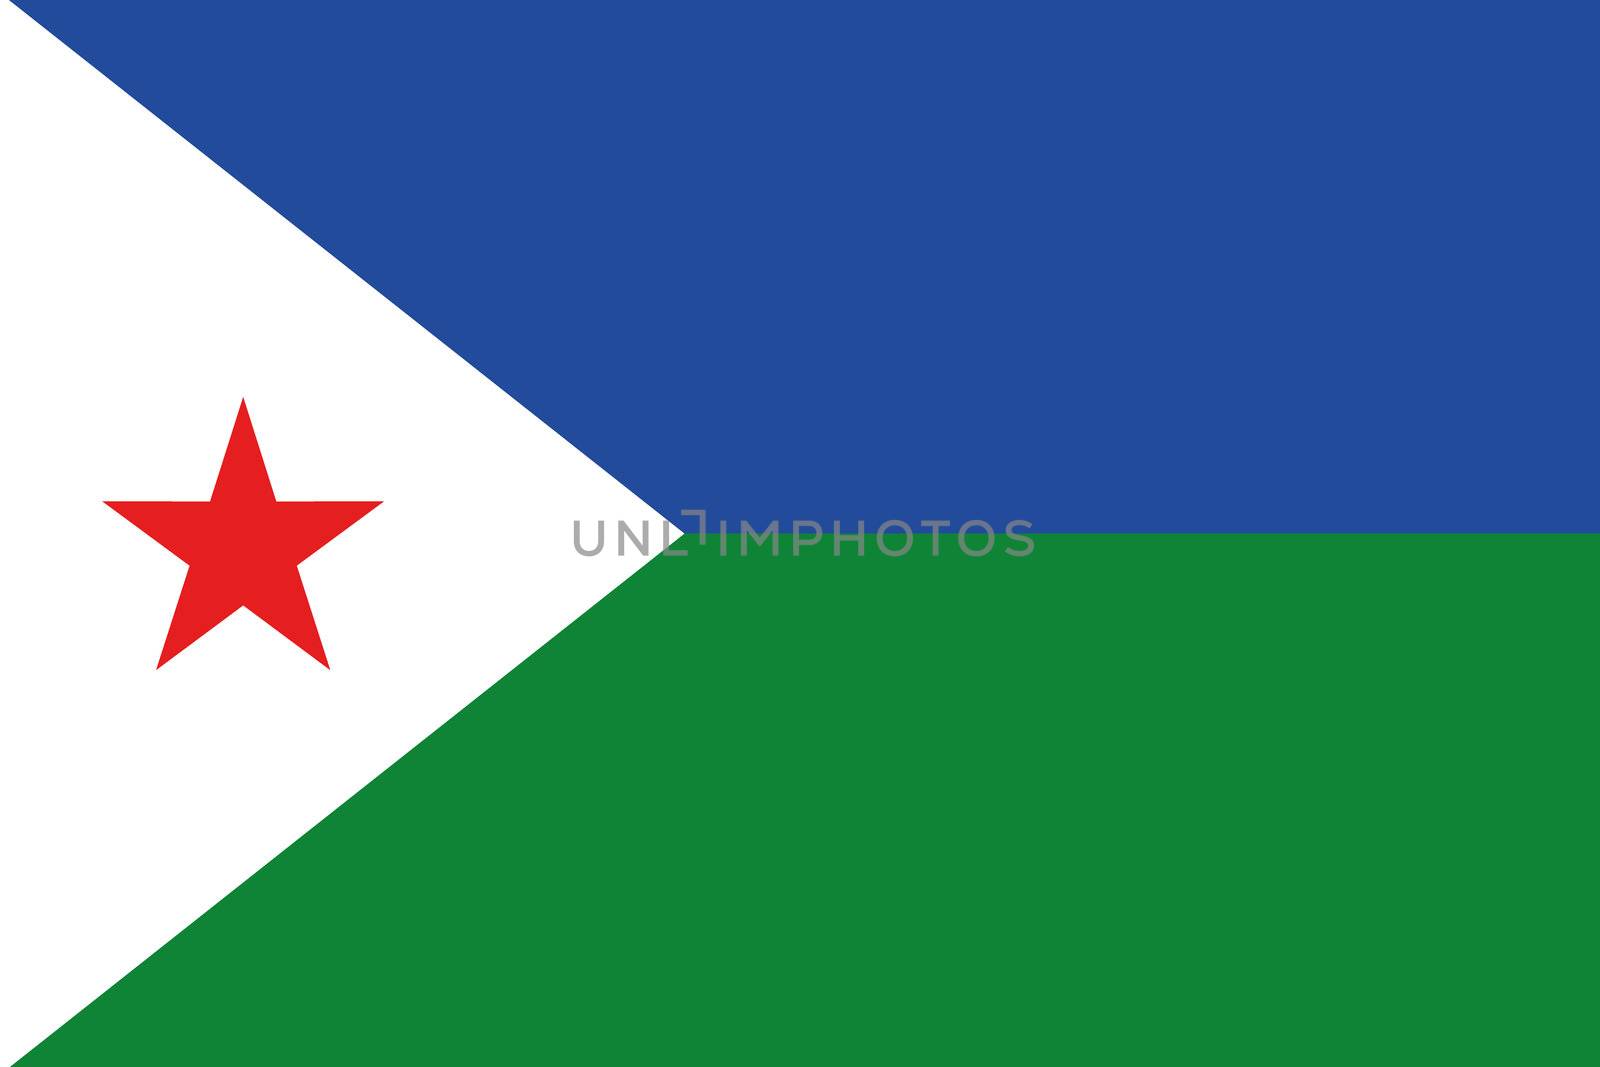 An illustration of the flag of Djibouti